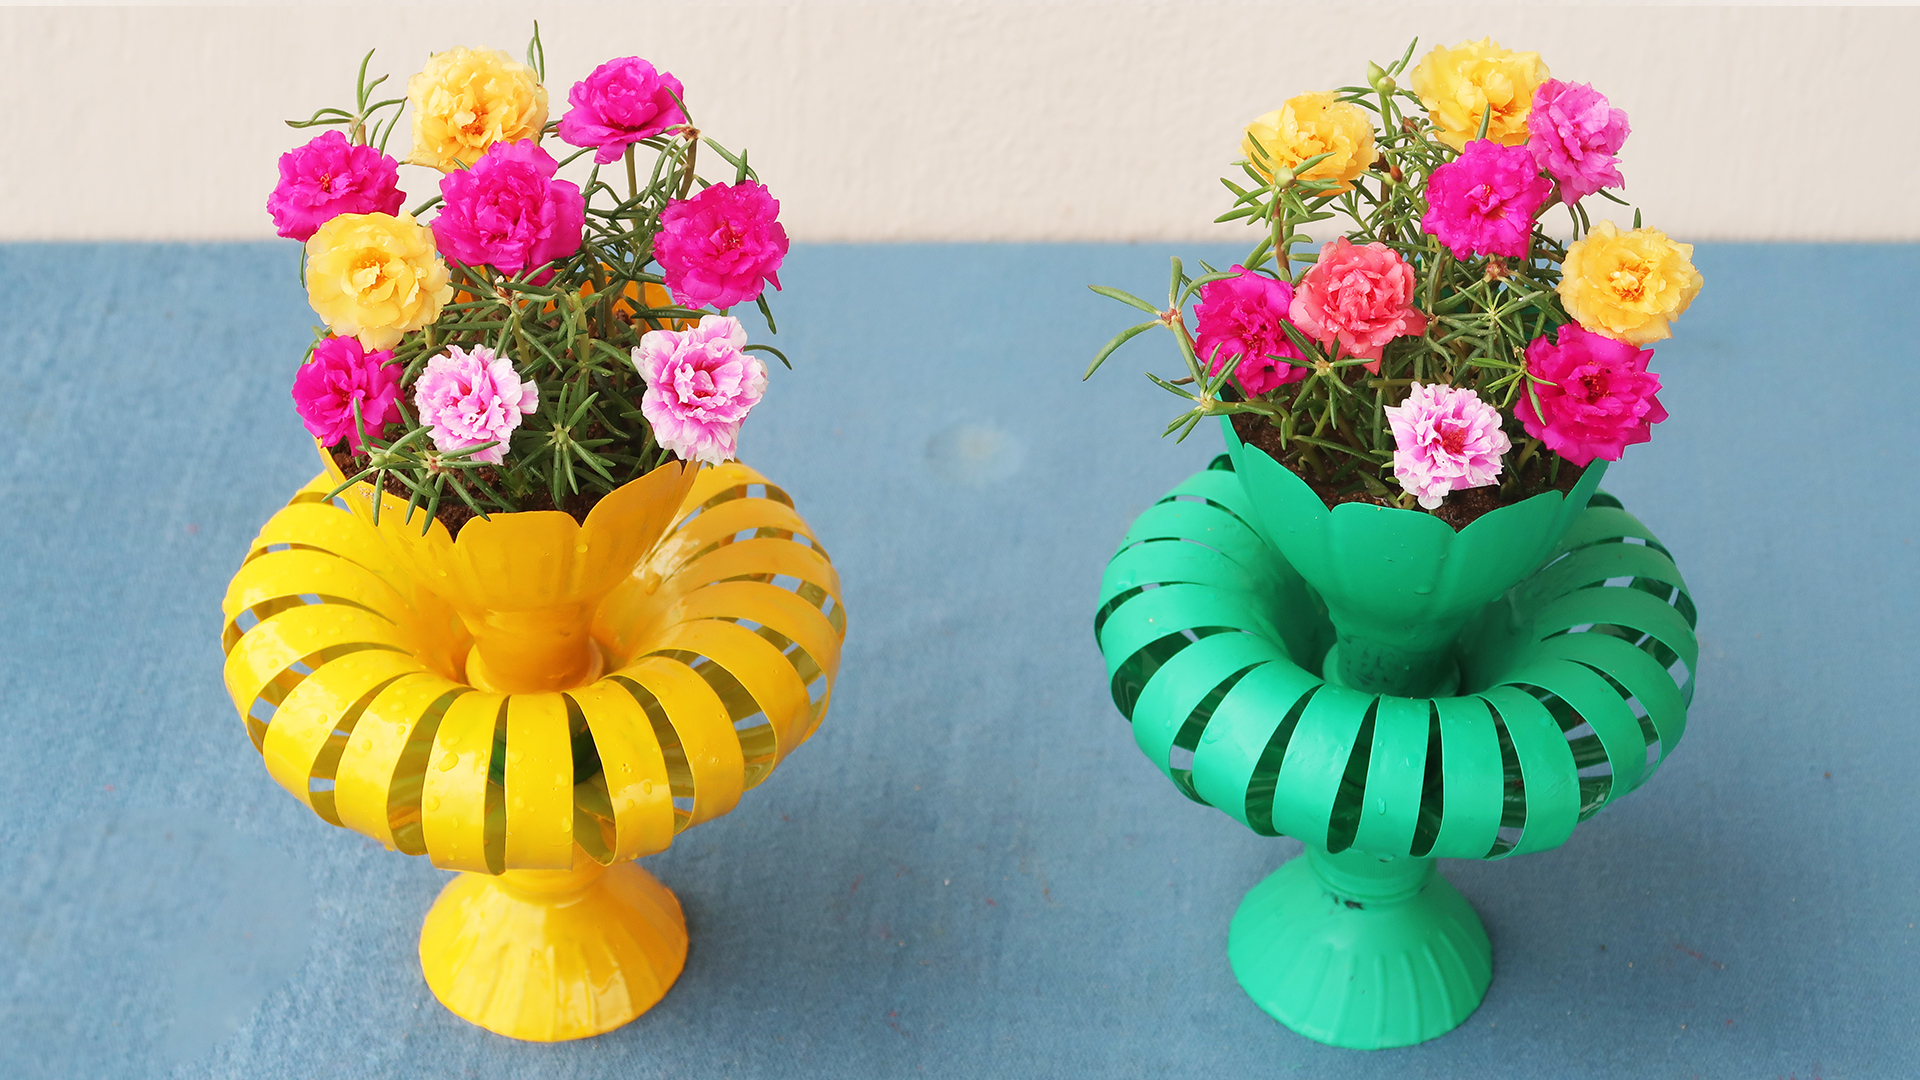 Creative Flower Pot Ideas, Beautiful Flower Pots From Recycled Plastic Bottles